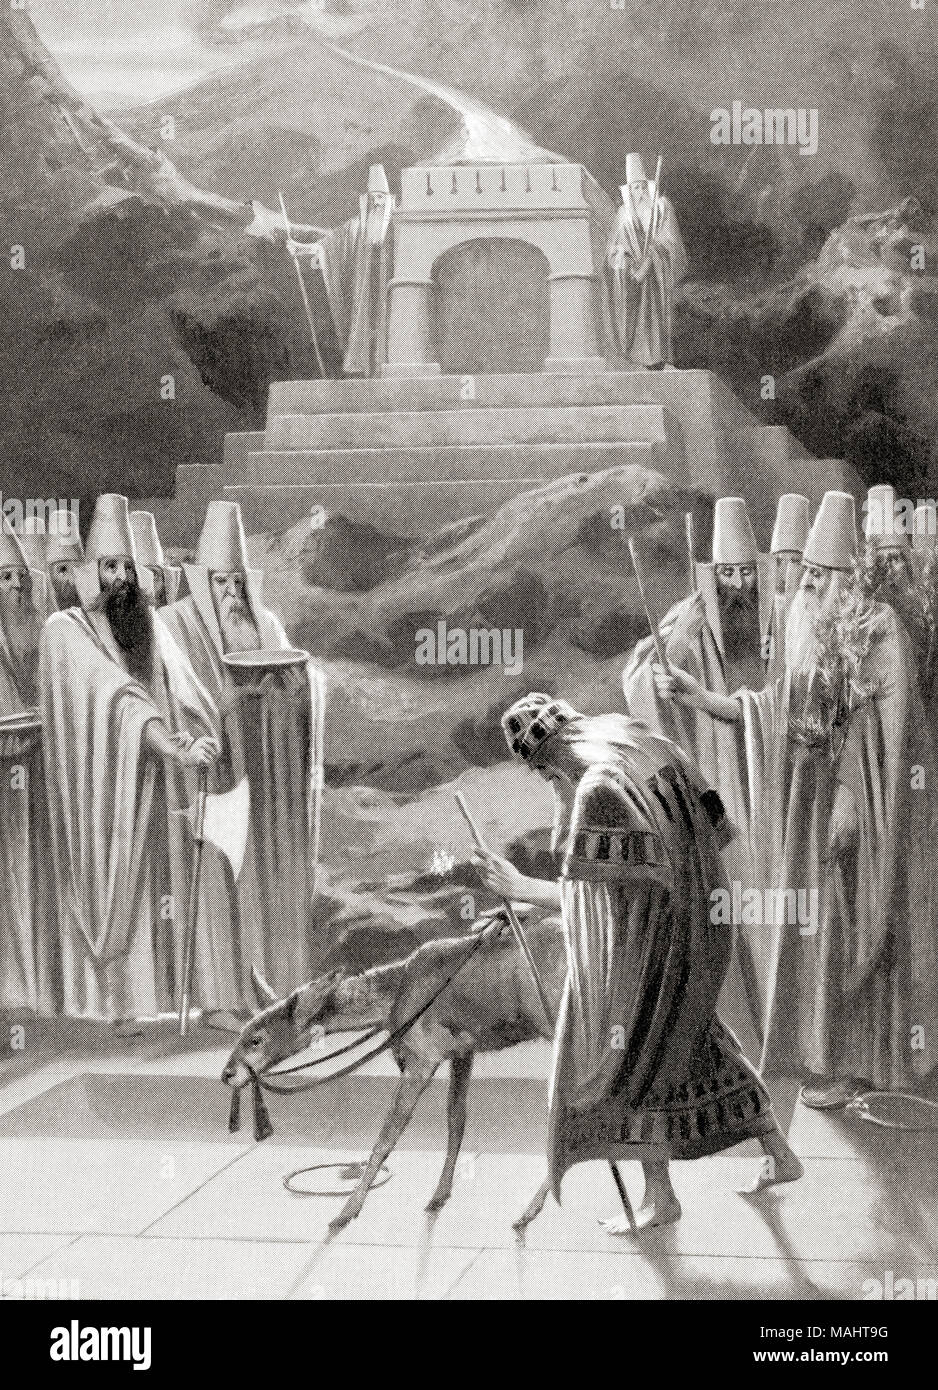 The beginnings of fire-worship.  The ancient Aryans of Persia offered sacrifices at altars tended by fire-kindling priests known as athravan, this led to the worship of the sacrifical flame itself, the only point of the ancient ritual preserved by Zoroaster in his reforms.  From Hutchinson's History of the Nations, published 1915 Stock Photo